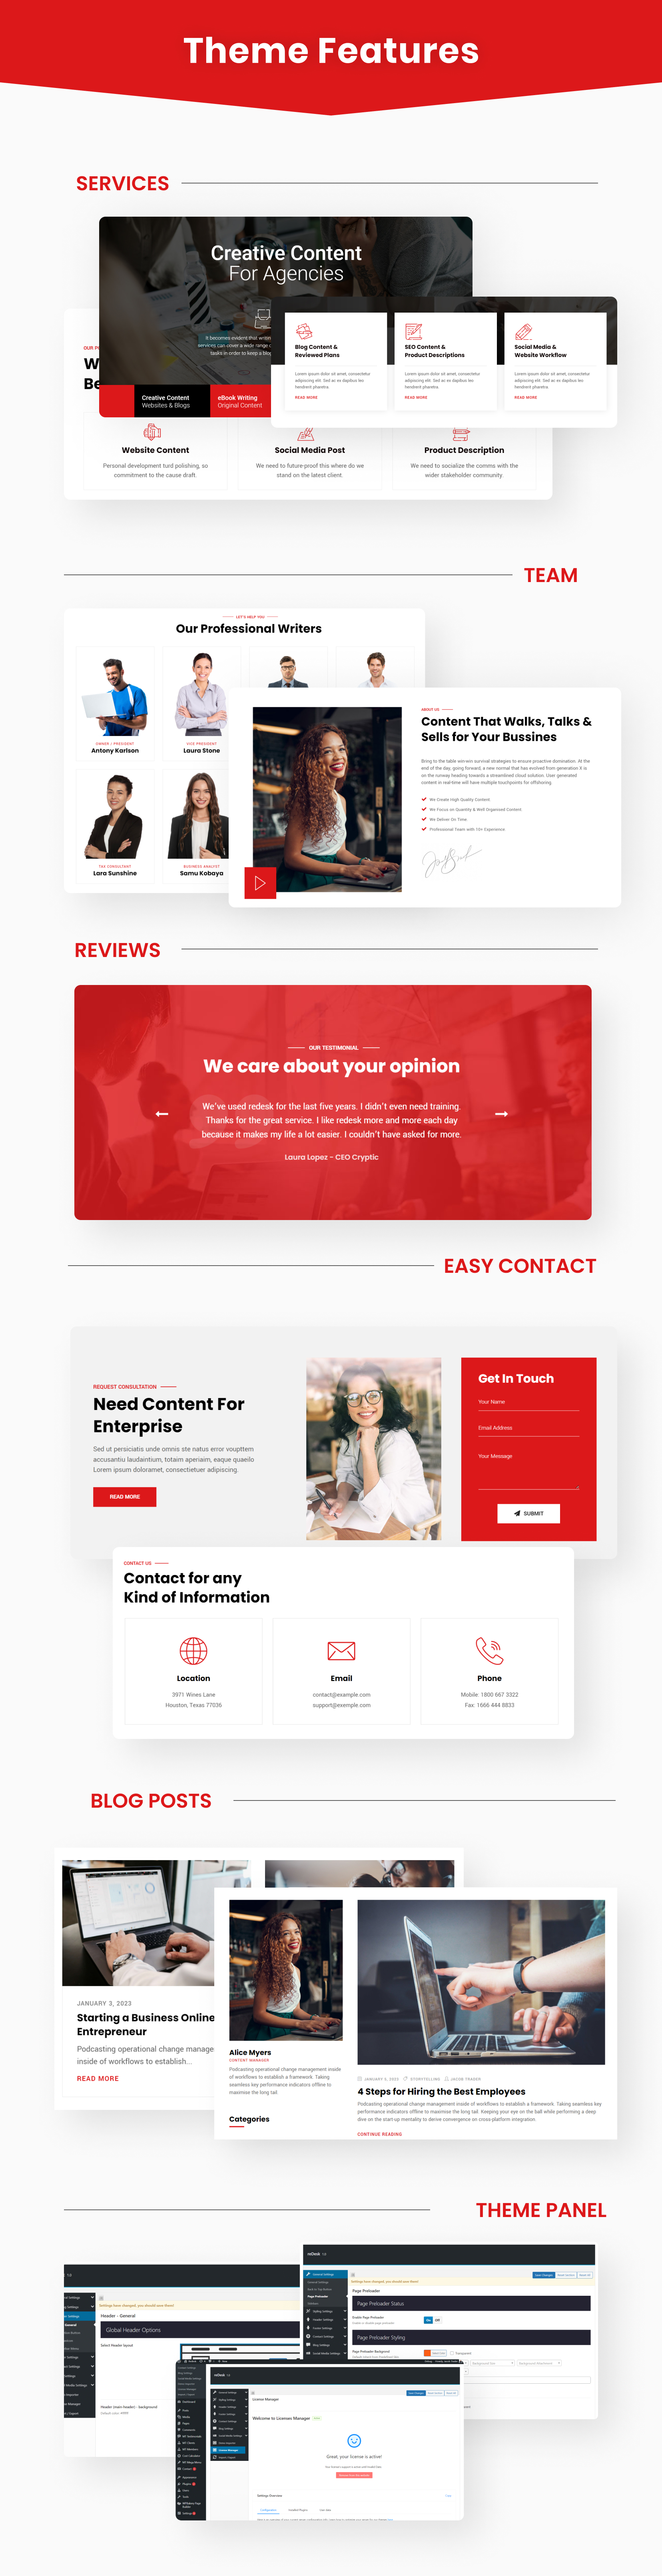 ReDesk - Content Writing & Copywriting Theme - 2